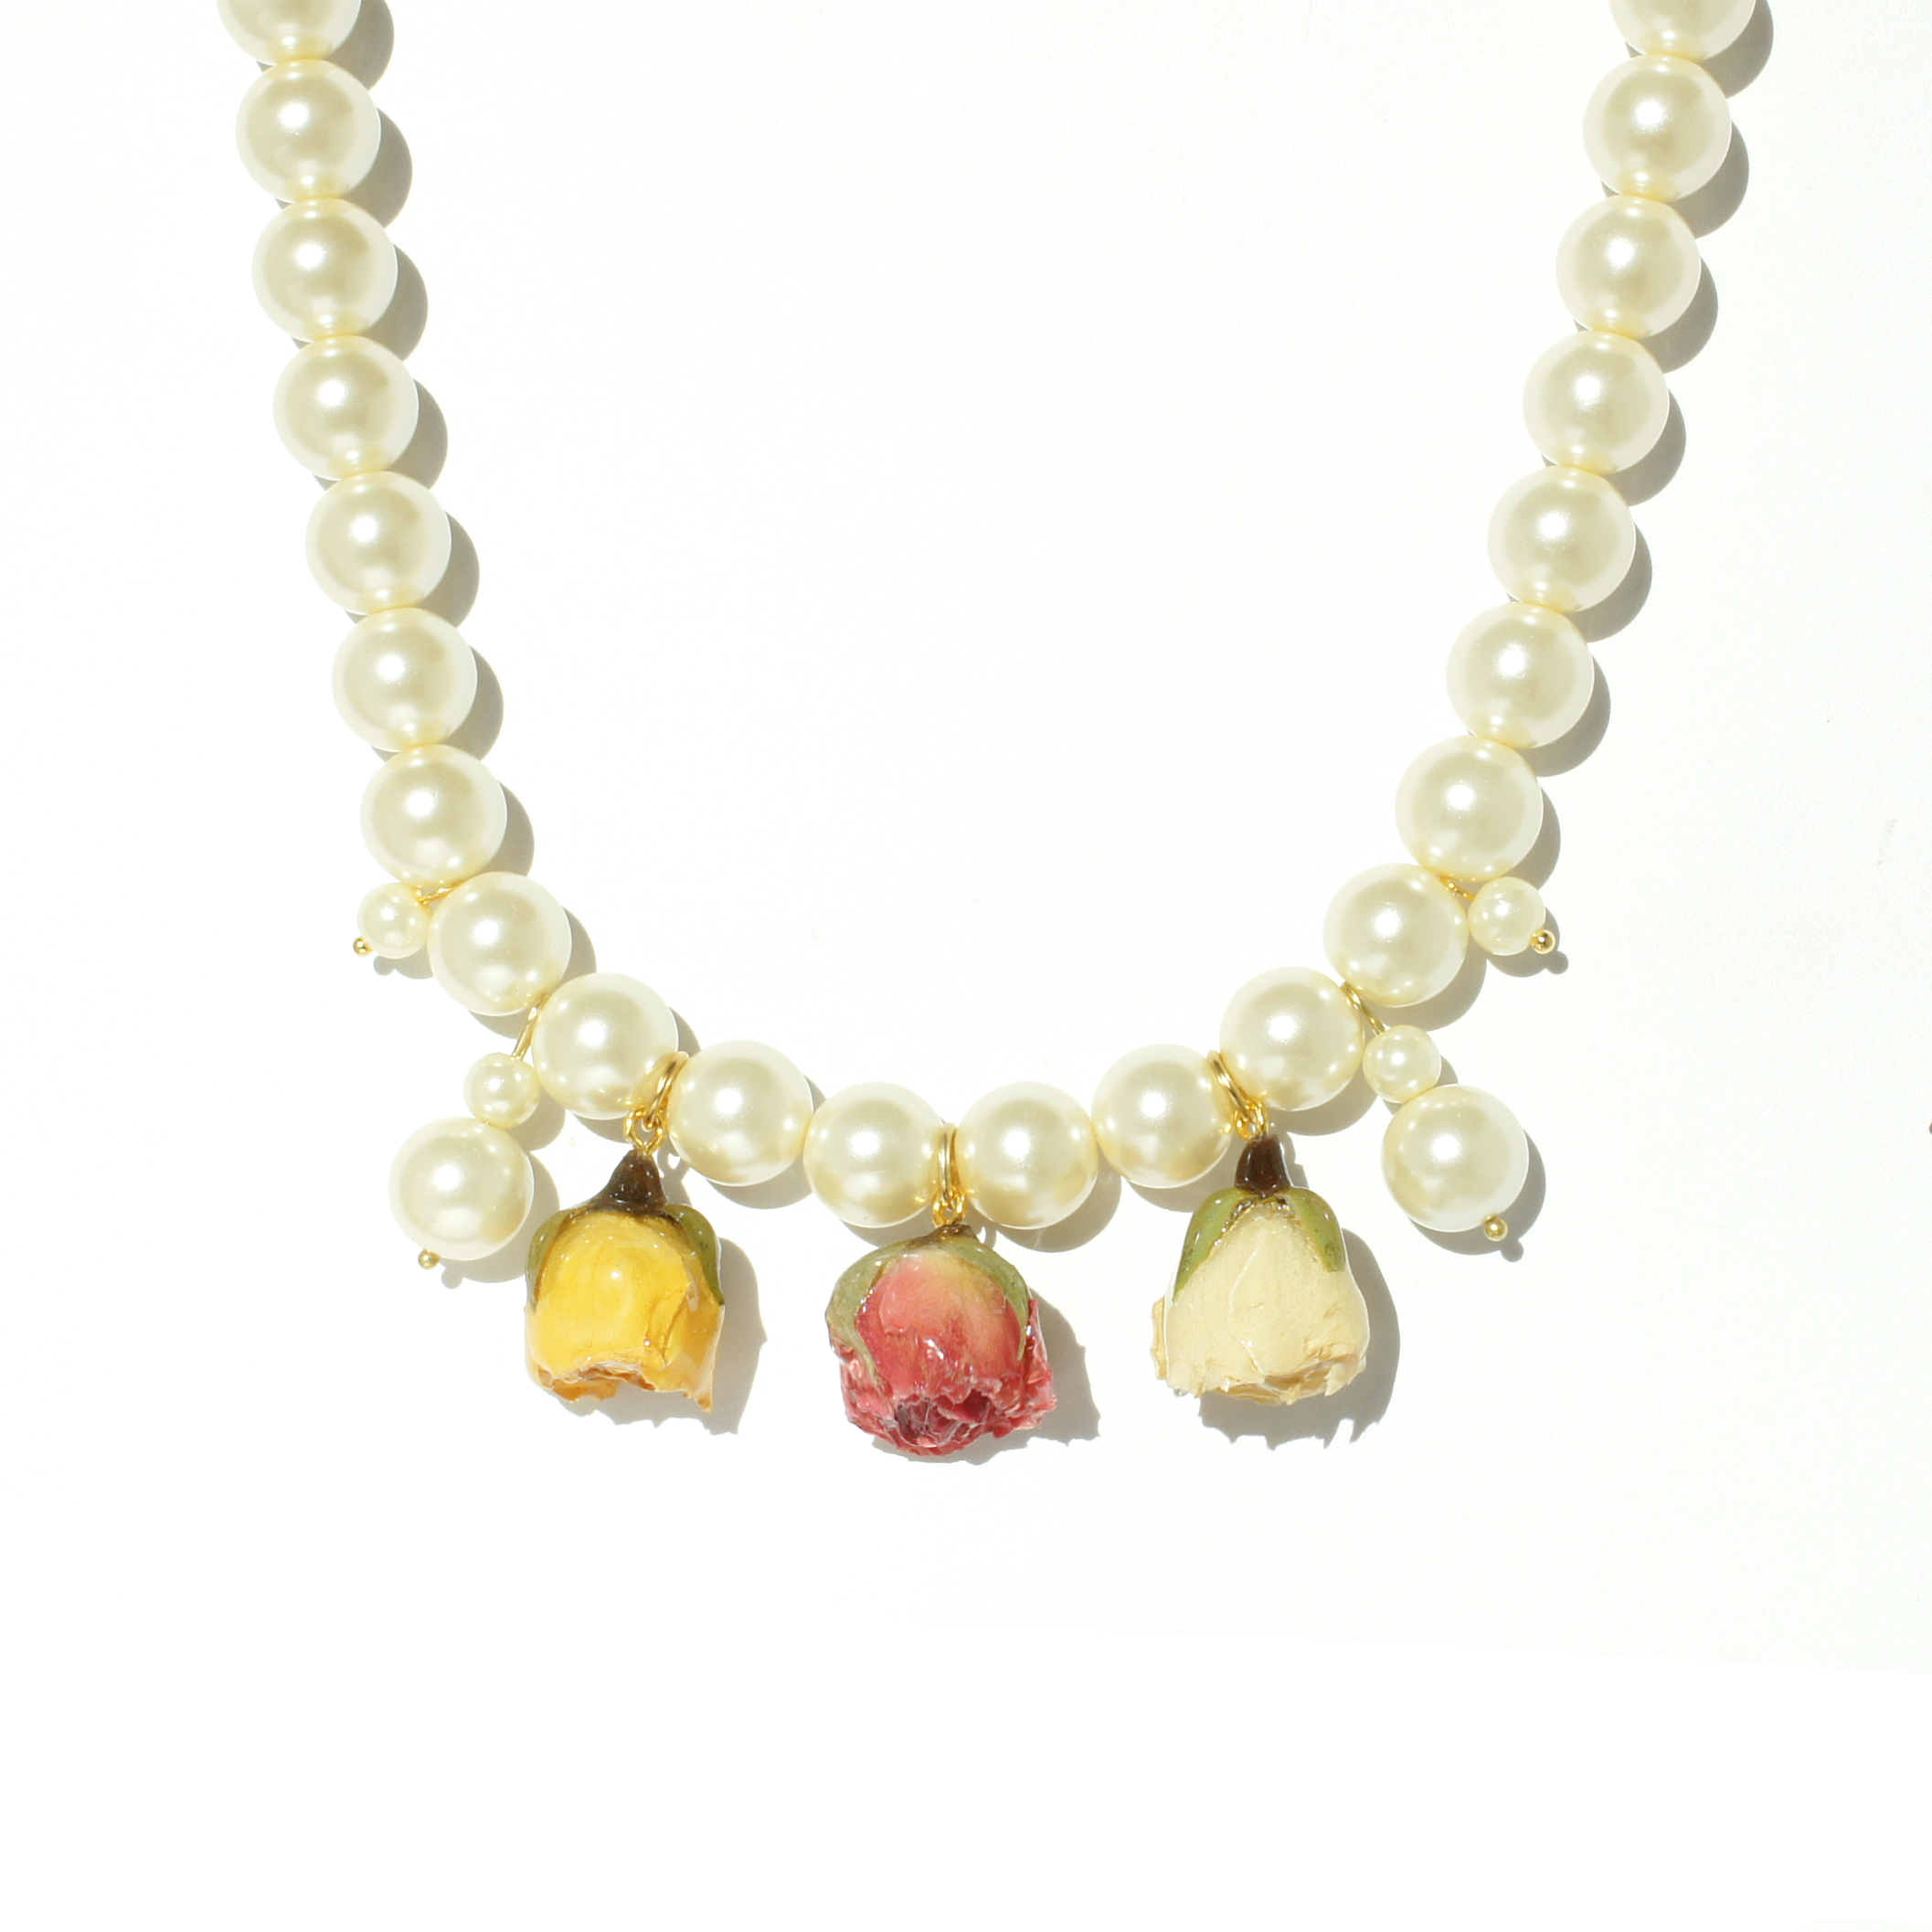 *REAL FLOWER* Queen Anne Jumbo Pearl Collar Necklace with Rosebuds